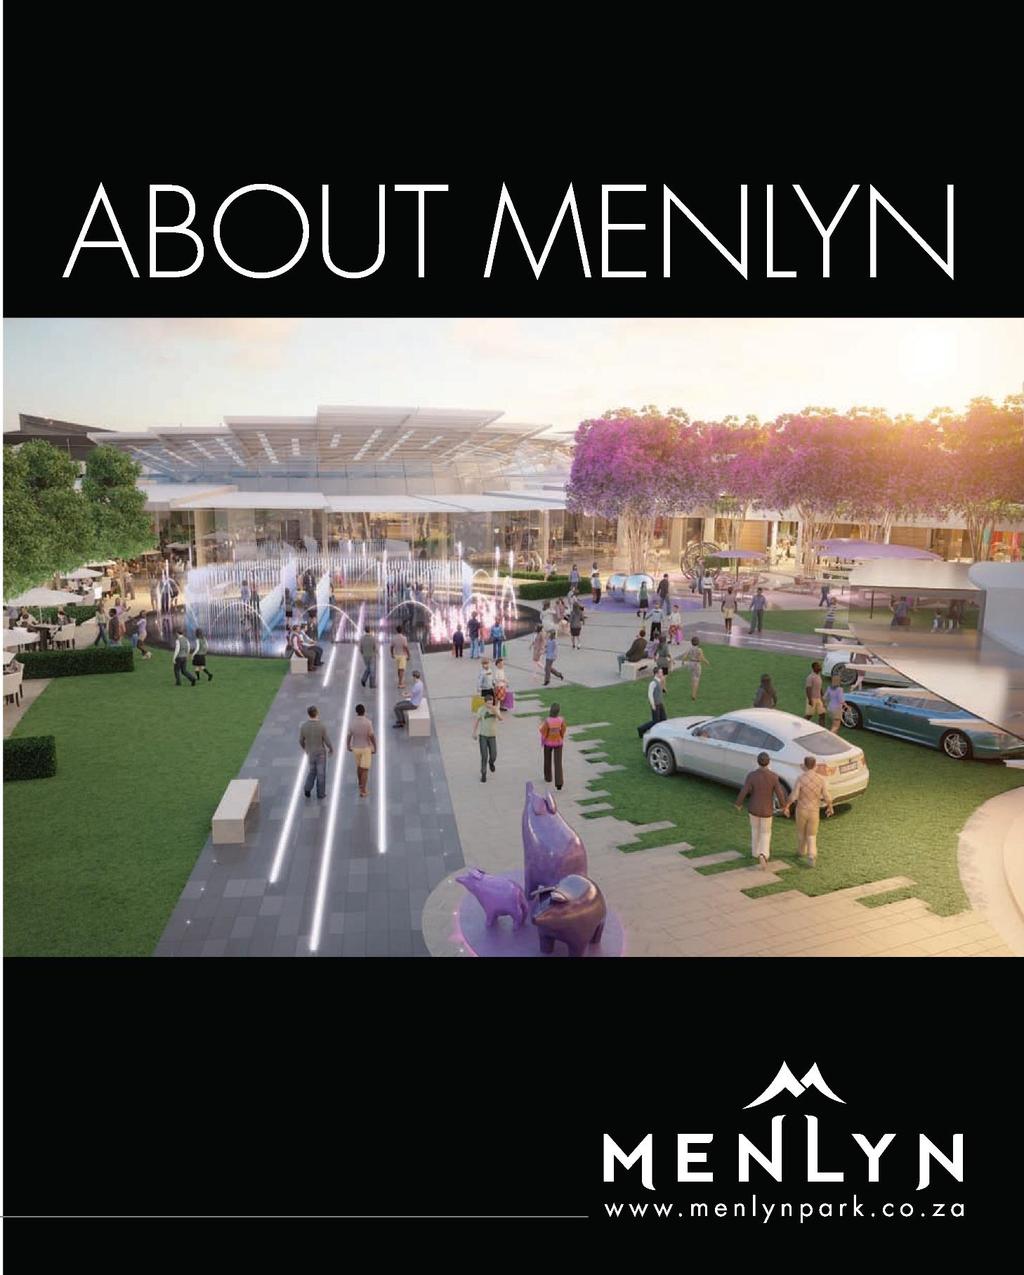 Menlyn Park Shopping Centre is an award-winning super regional shopping centre situated in the fast-developing Menlyn node in the capital city of Tshwane, South Africa.